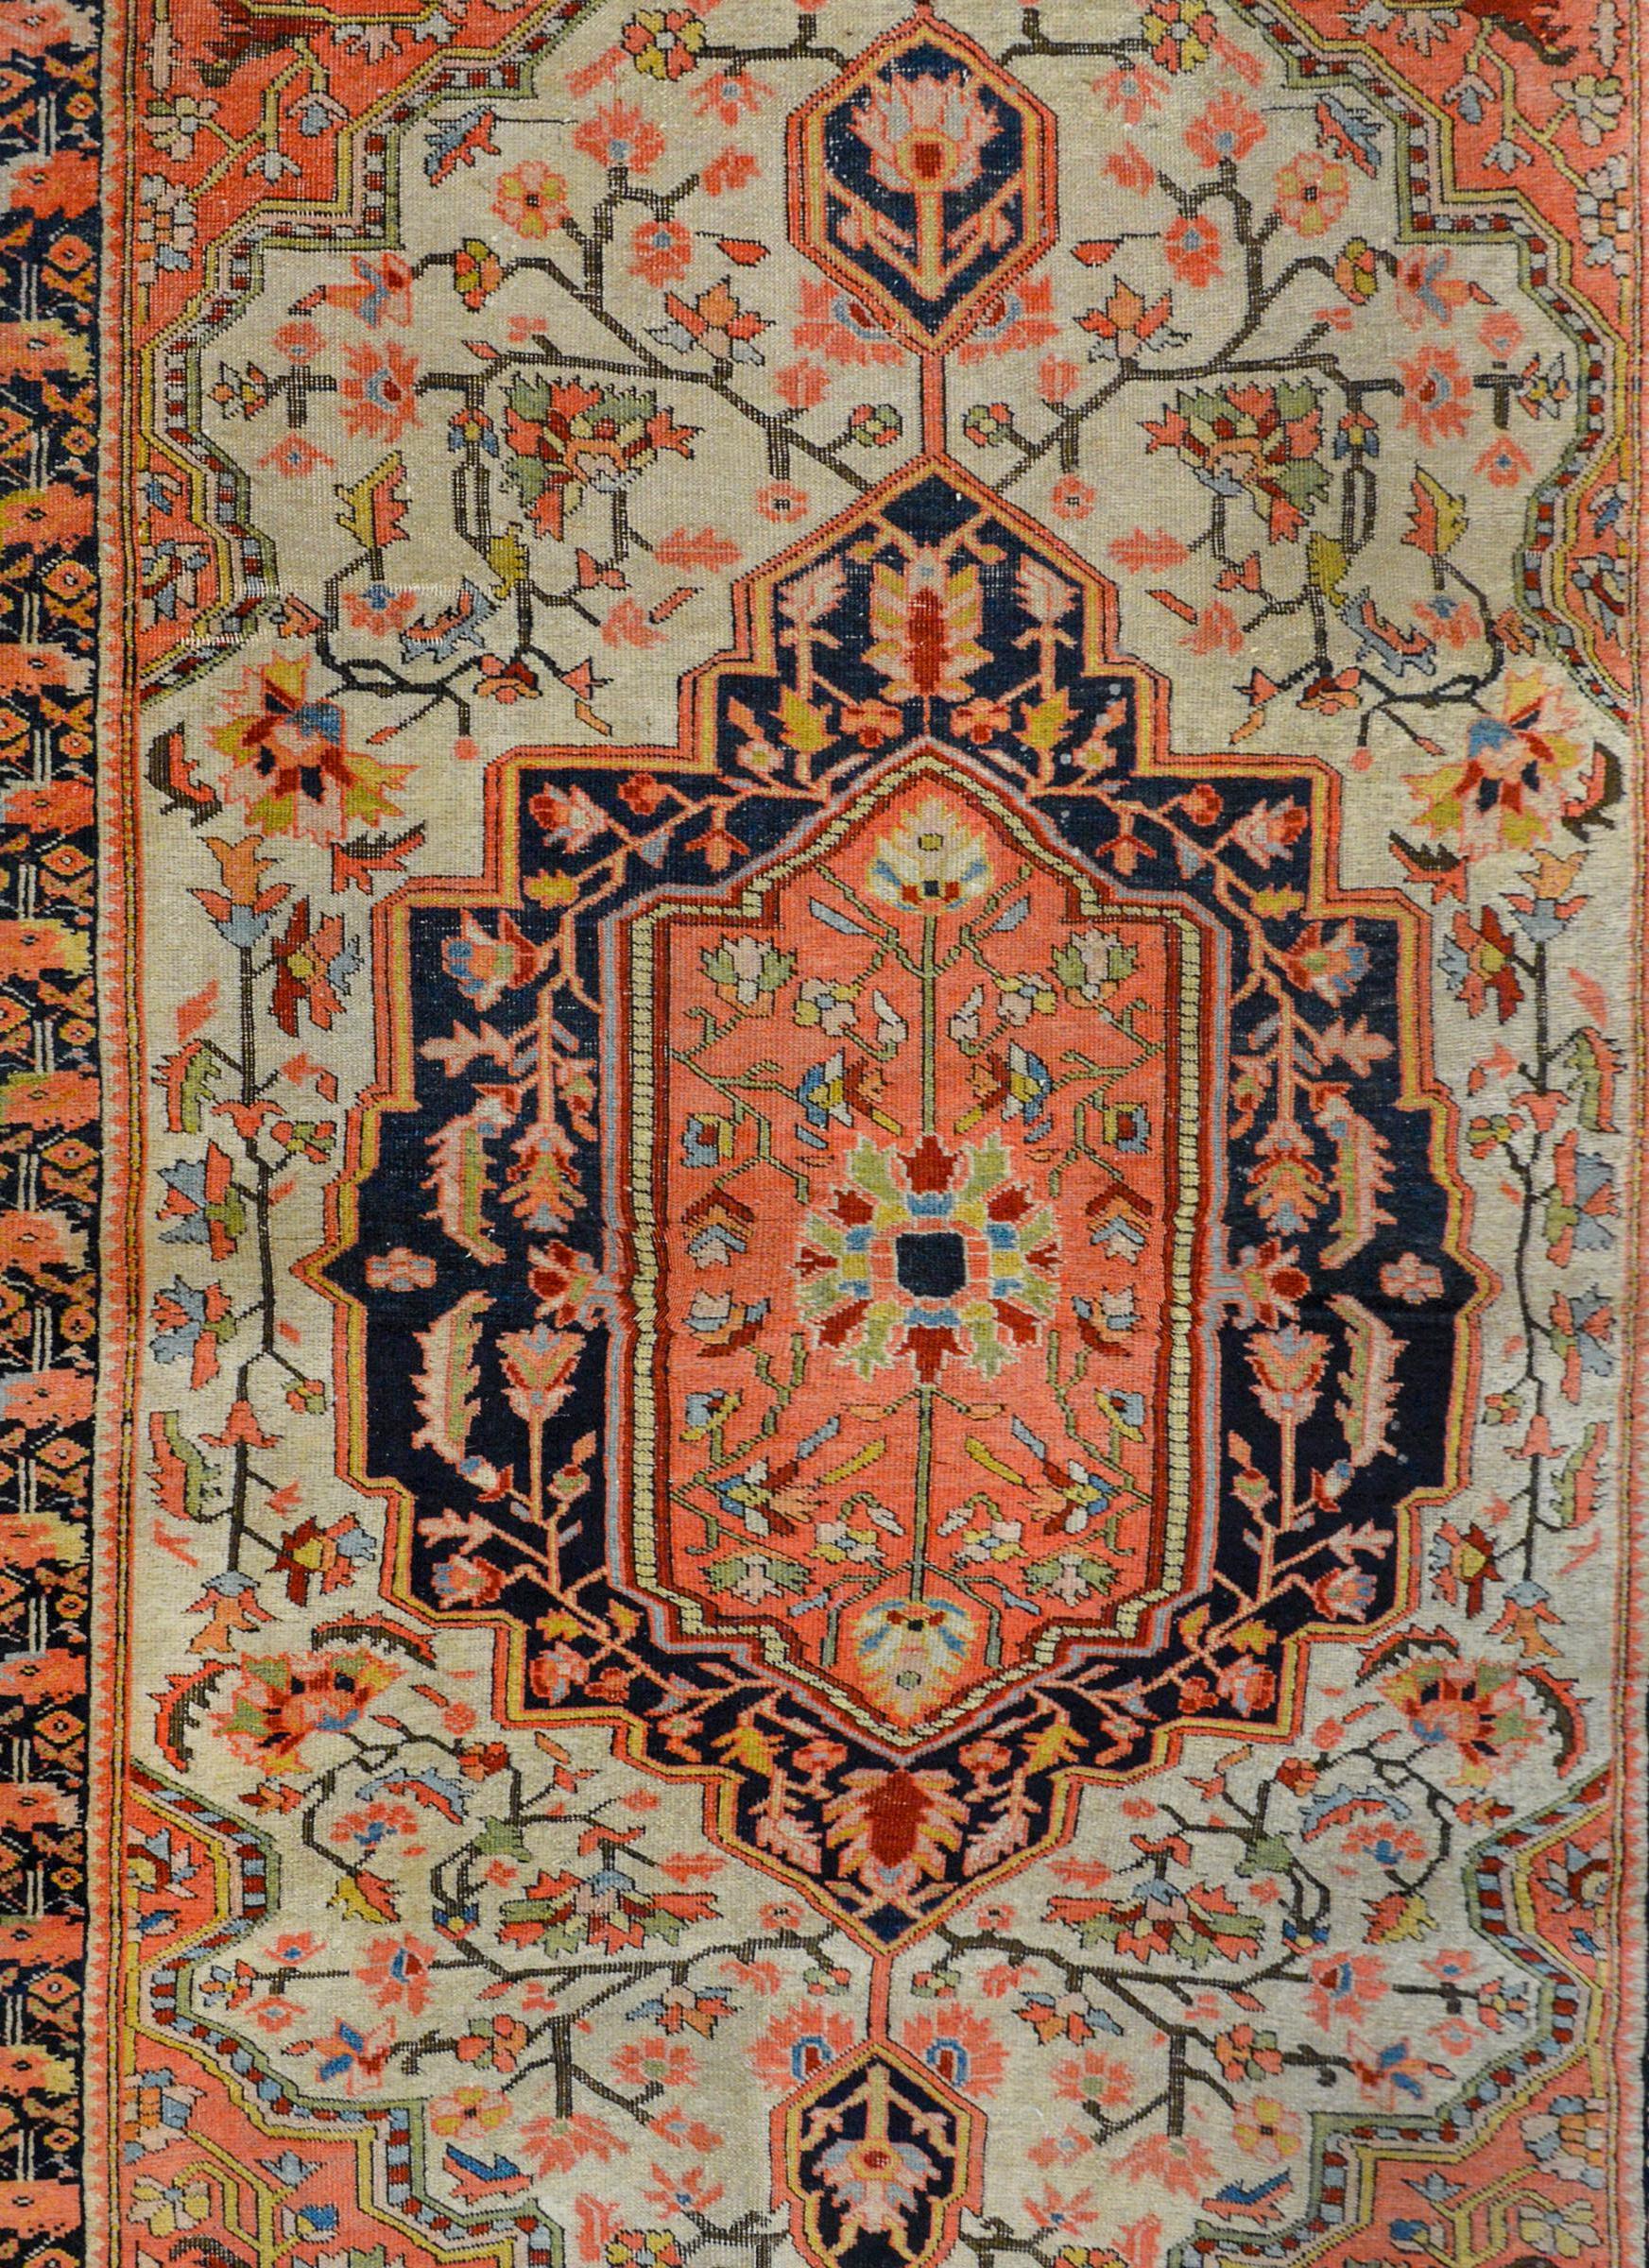 A wild early 20th century Persian Sarouk Farahan rug with fantastic pattern containing multiple medallions with myriad scrolling vines and flowers on coral, indigo, and white backgrounds surrounded by a beautiful stylized floral and scrolling vine